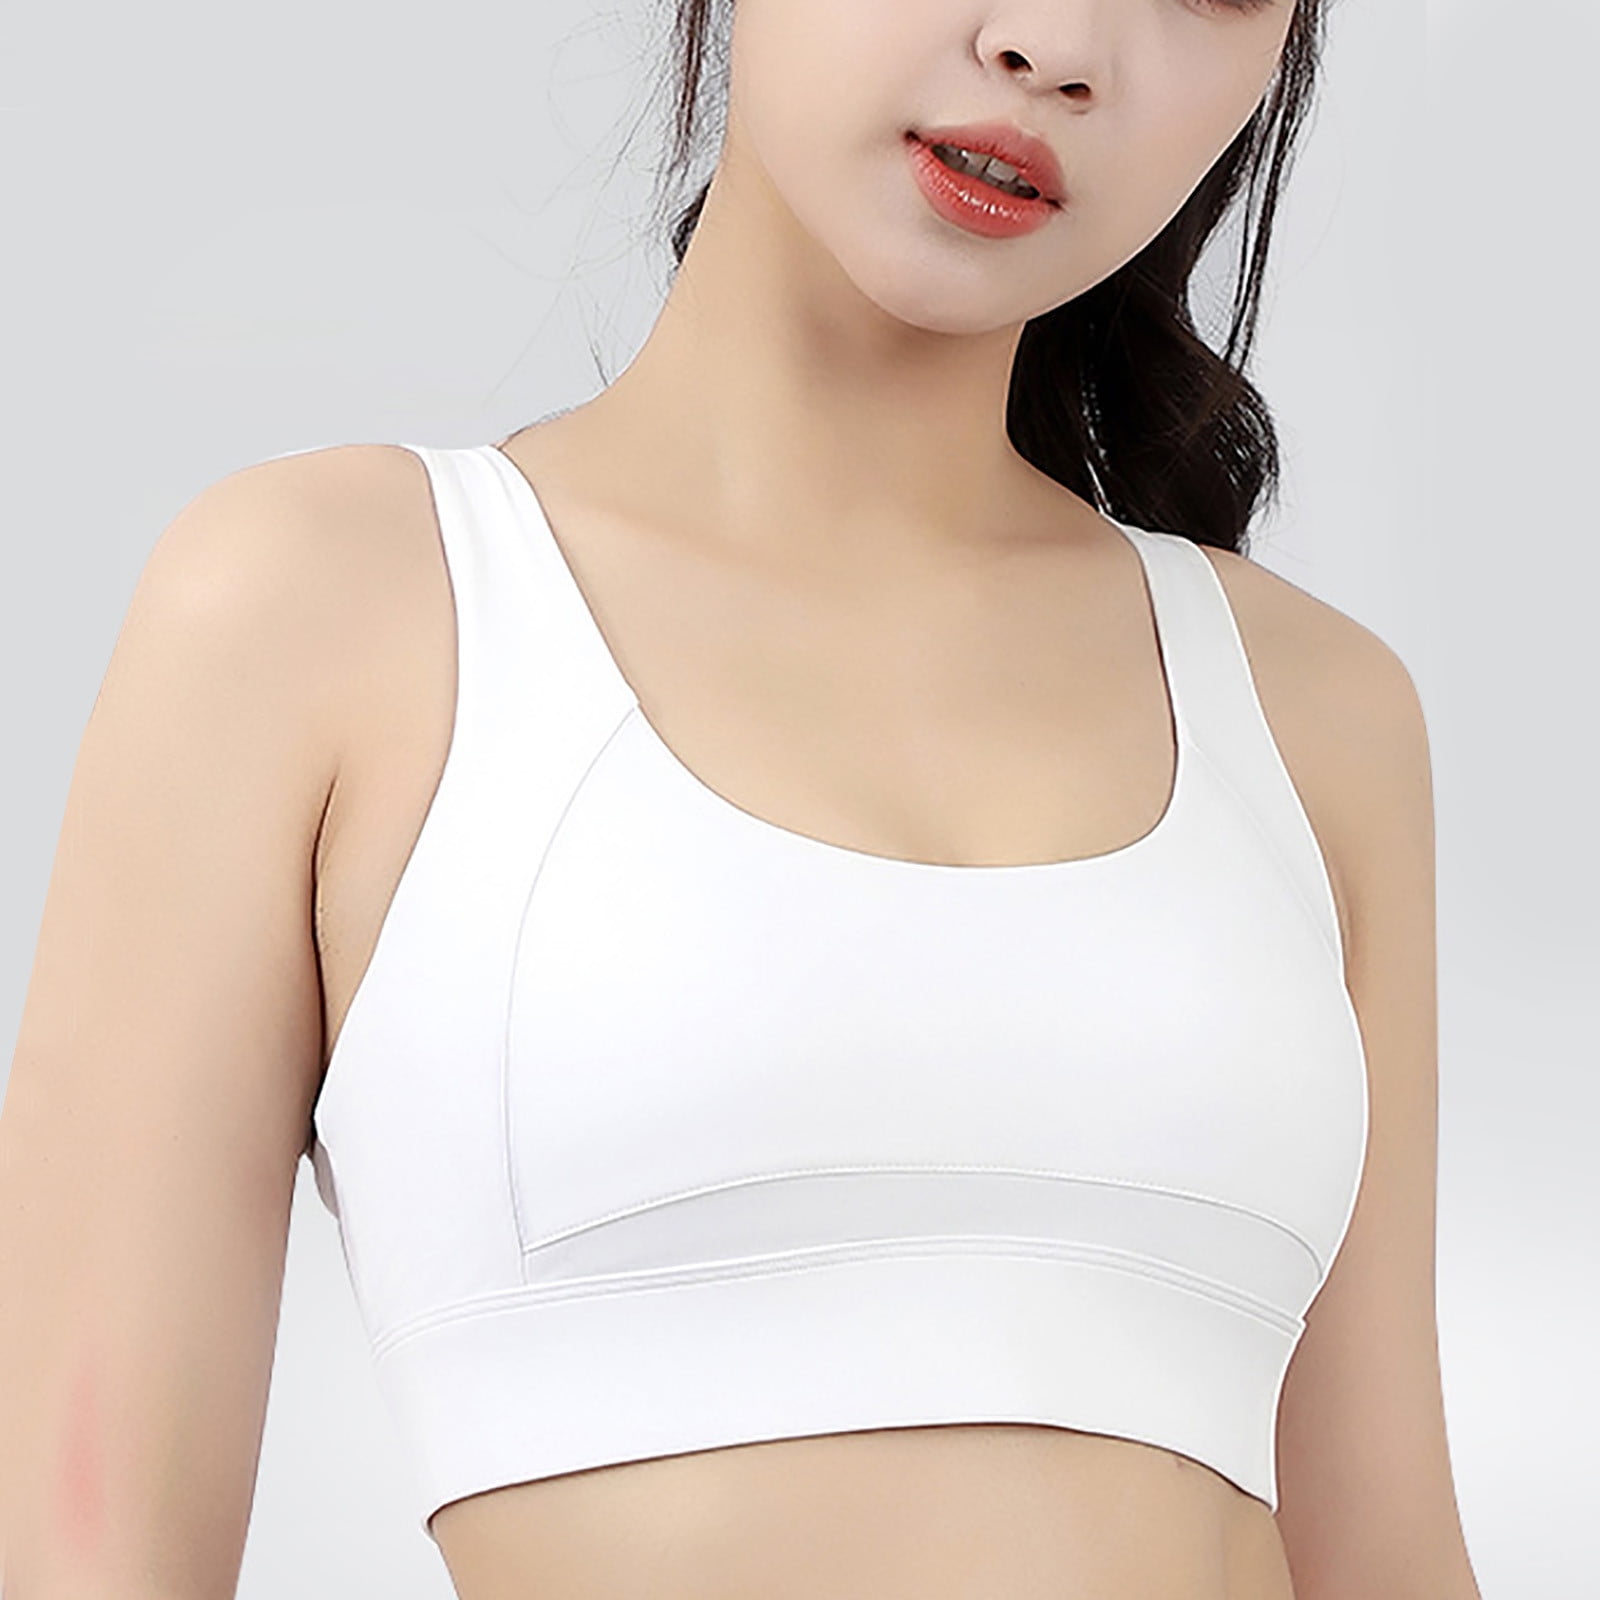 Where To Get The Best Sports Bras For The New Year - Southlake